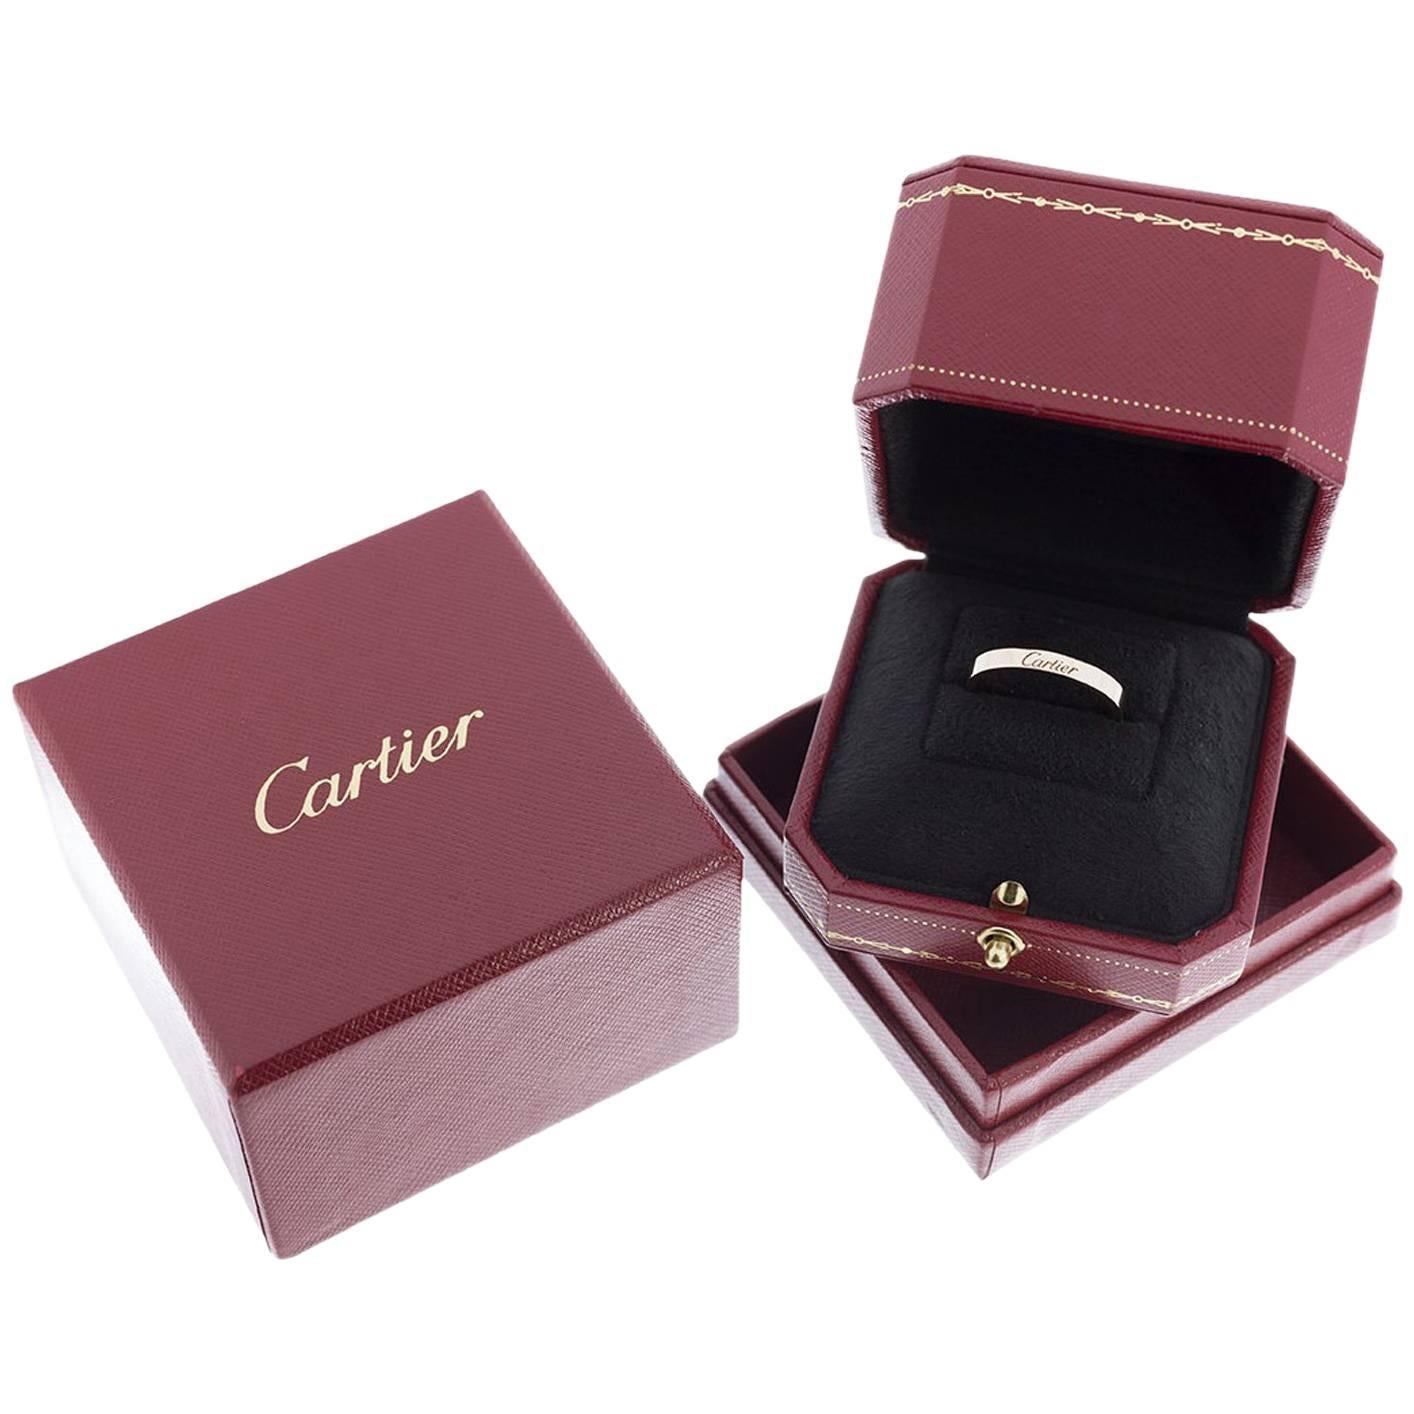 Cartier 18 Karat Pink Gold 3mm Signature Engraved Wedding Band Ring With Box